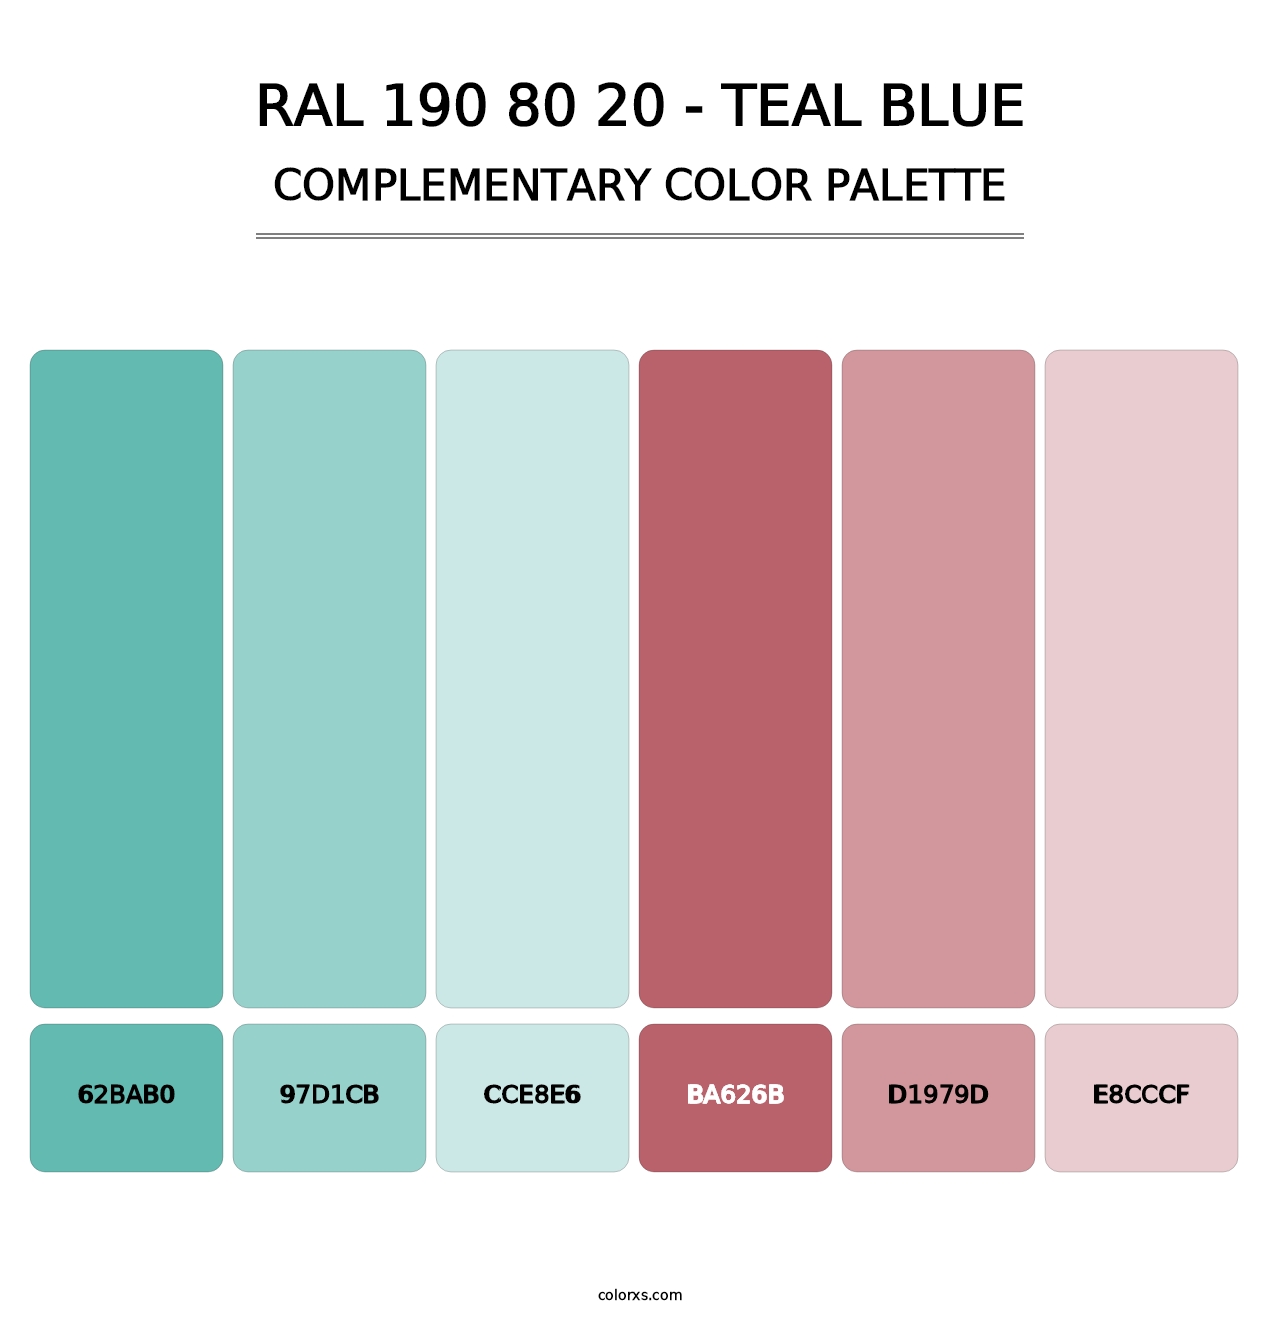 RAL 190 80 20 - Teal Blue - Complementary Color Palette